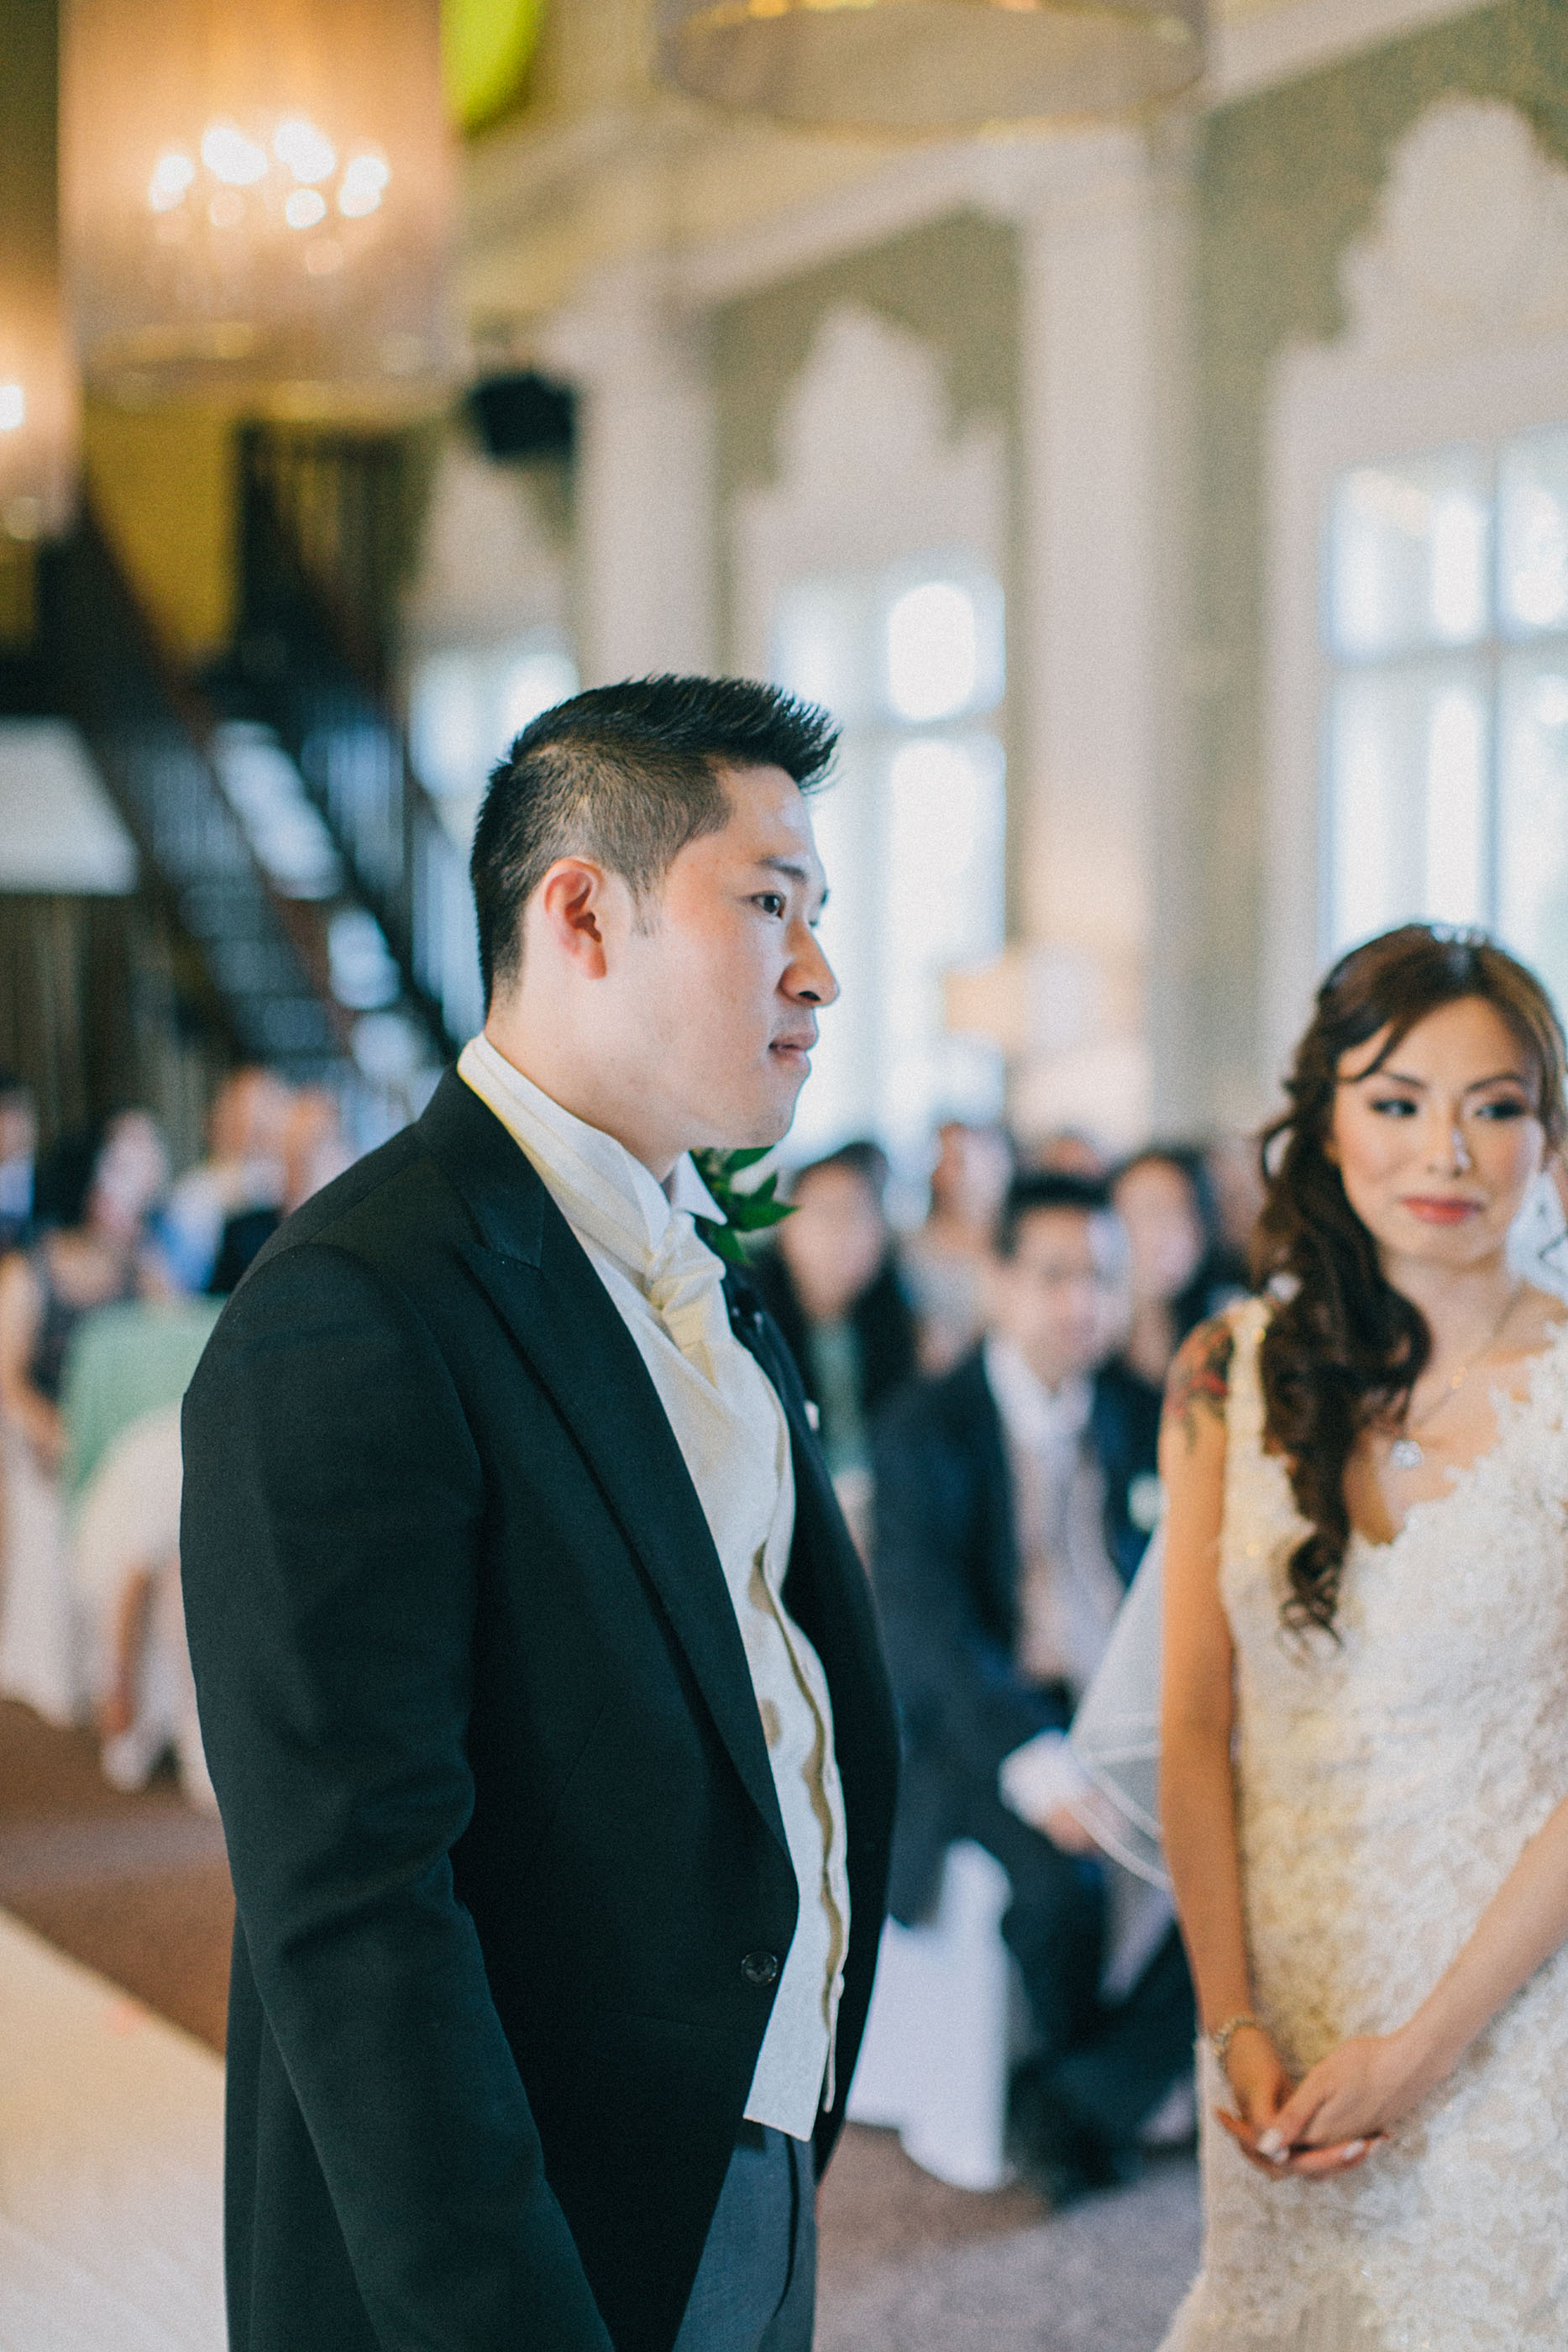 nicholas-lau-photo-photography-fine-art-film-wedding-london-asian-chinese-uk-mulitcultural-ceremony-reception-groom-vows-star-and-garter-venue